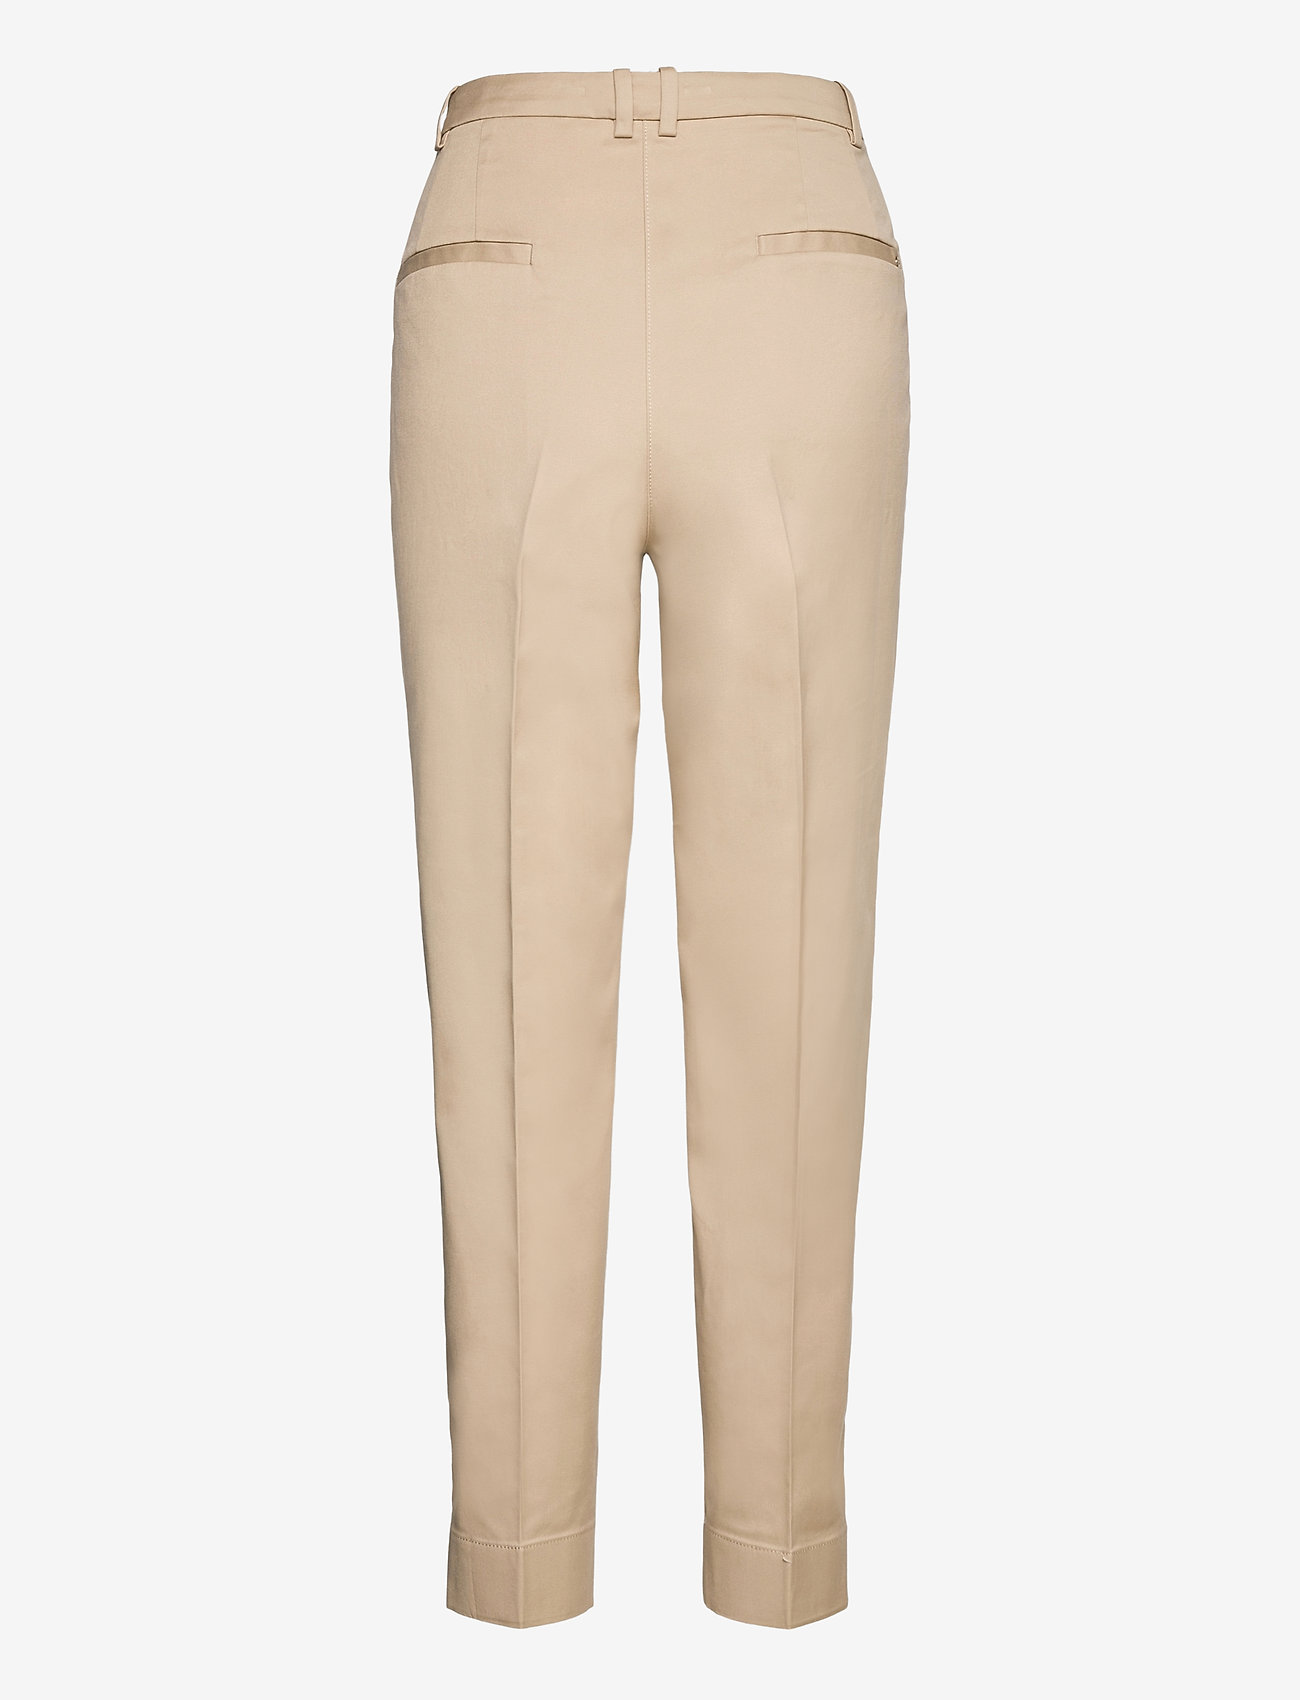 Esprit Collection - Business chinos made of stretch cotton - straight leg hosen - sand - 1